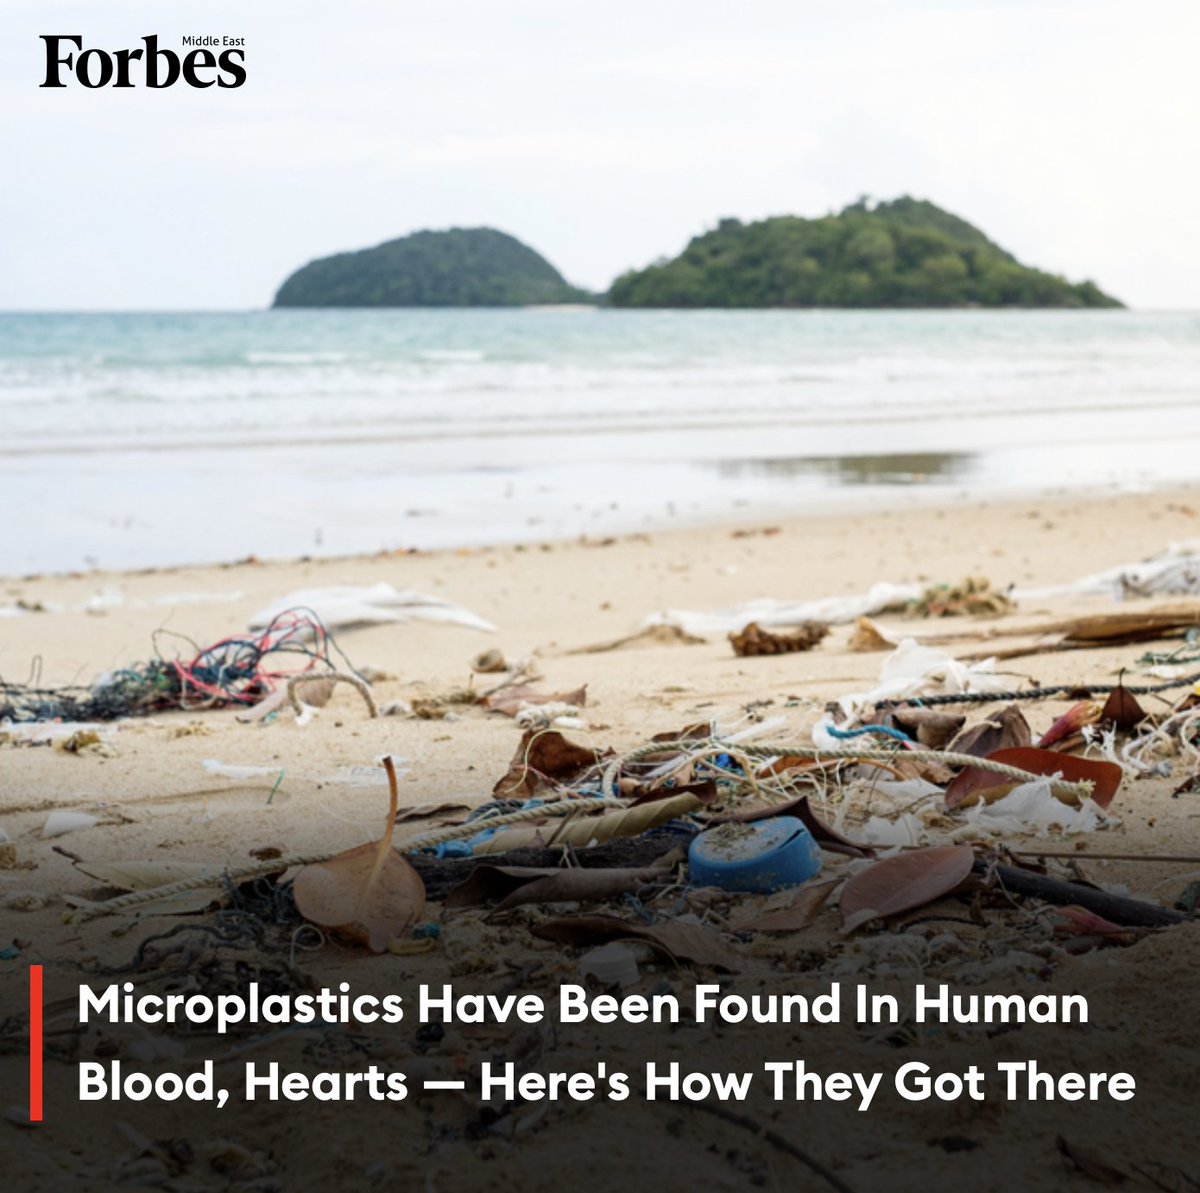 A recent research has shown that microscopic pieces of plastic have made their way into the human blood and organs through polluted food, water and air. #Forbes For more details: 🔗 on.forbesmiddleeast.com/grq8